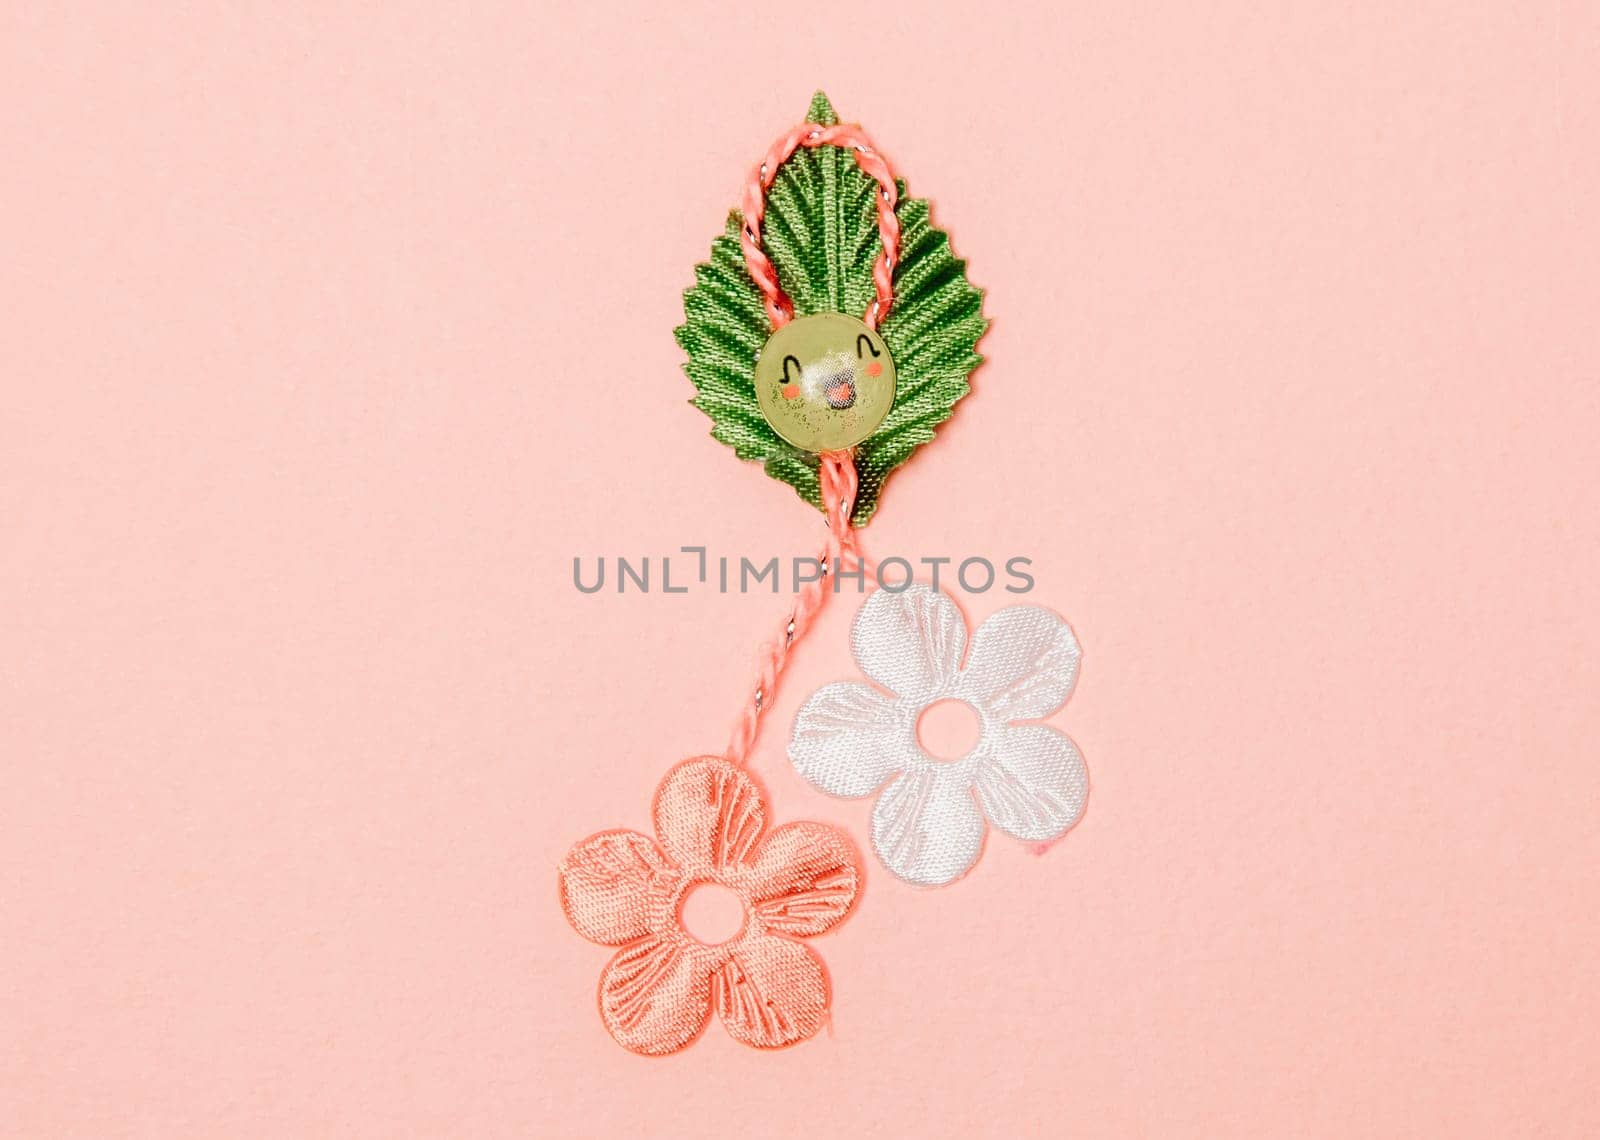 One beautiful homemade martisor made from flowers, a petal and a cheerful smiley face lies in the center on a pink background, flat lay close-up.